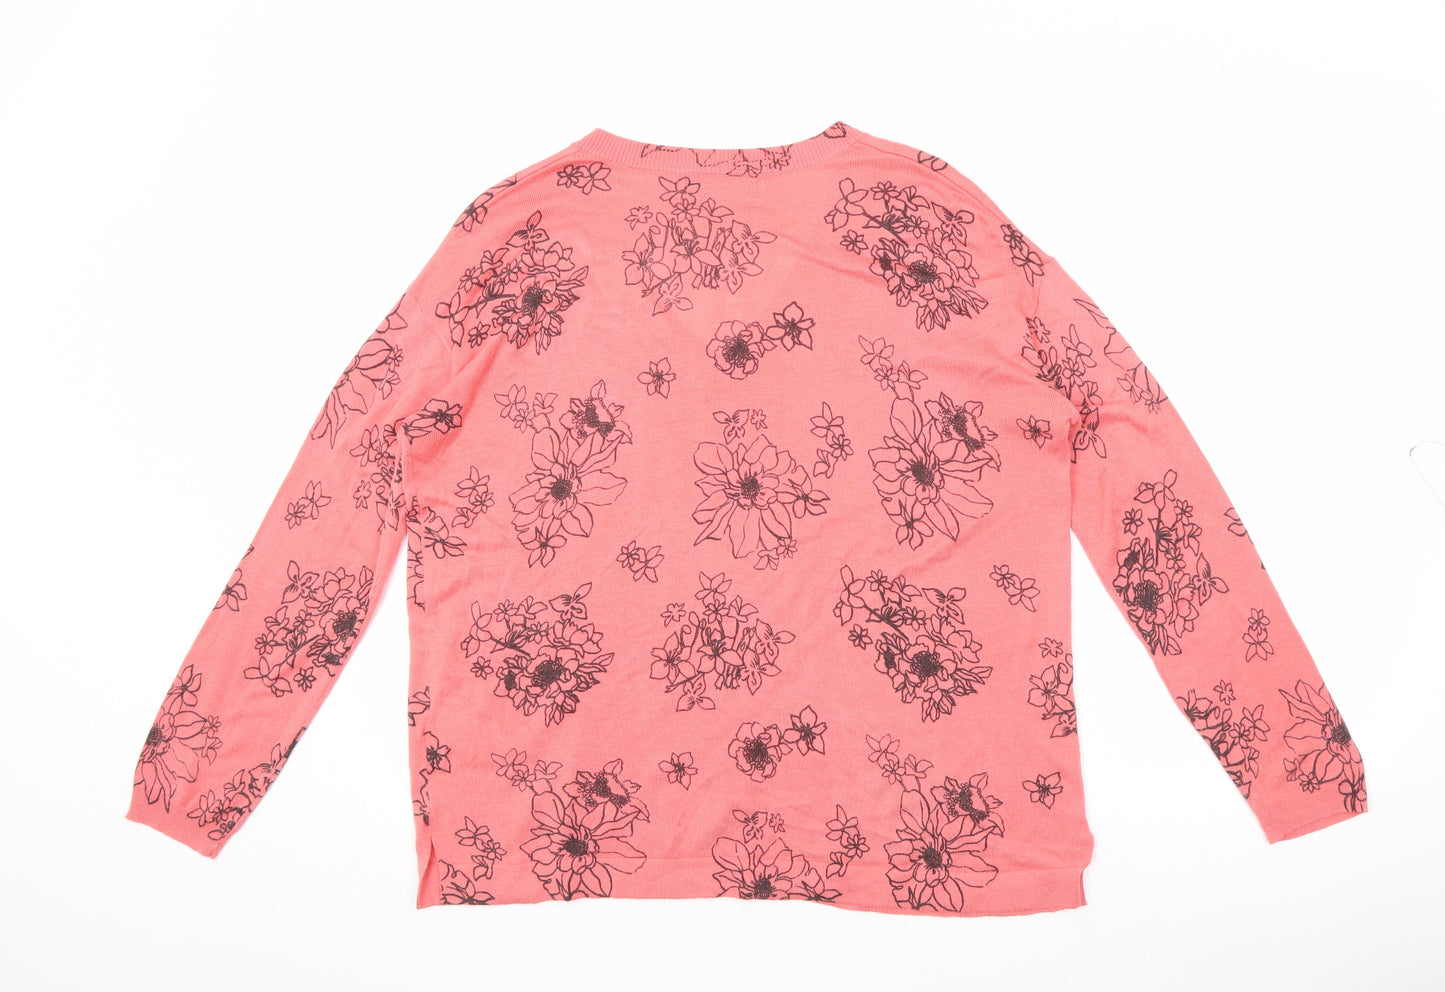 Marks and Spencer Womens Pink V-Neck Floral Acrylic Pullover Jumper Size M